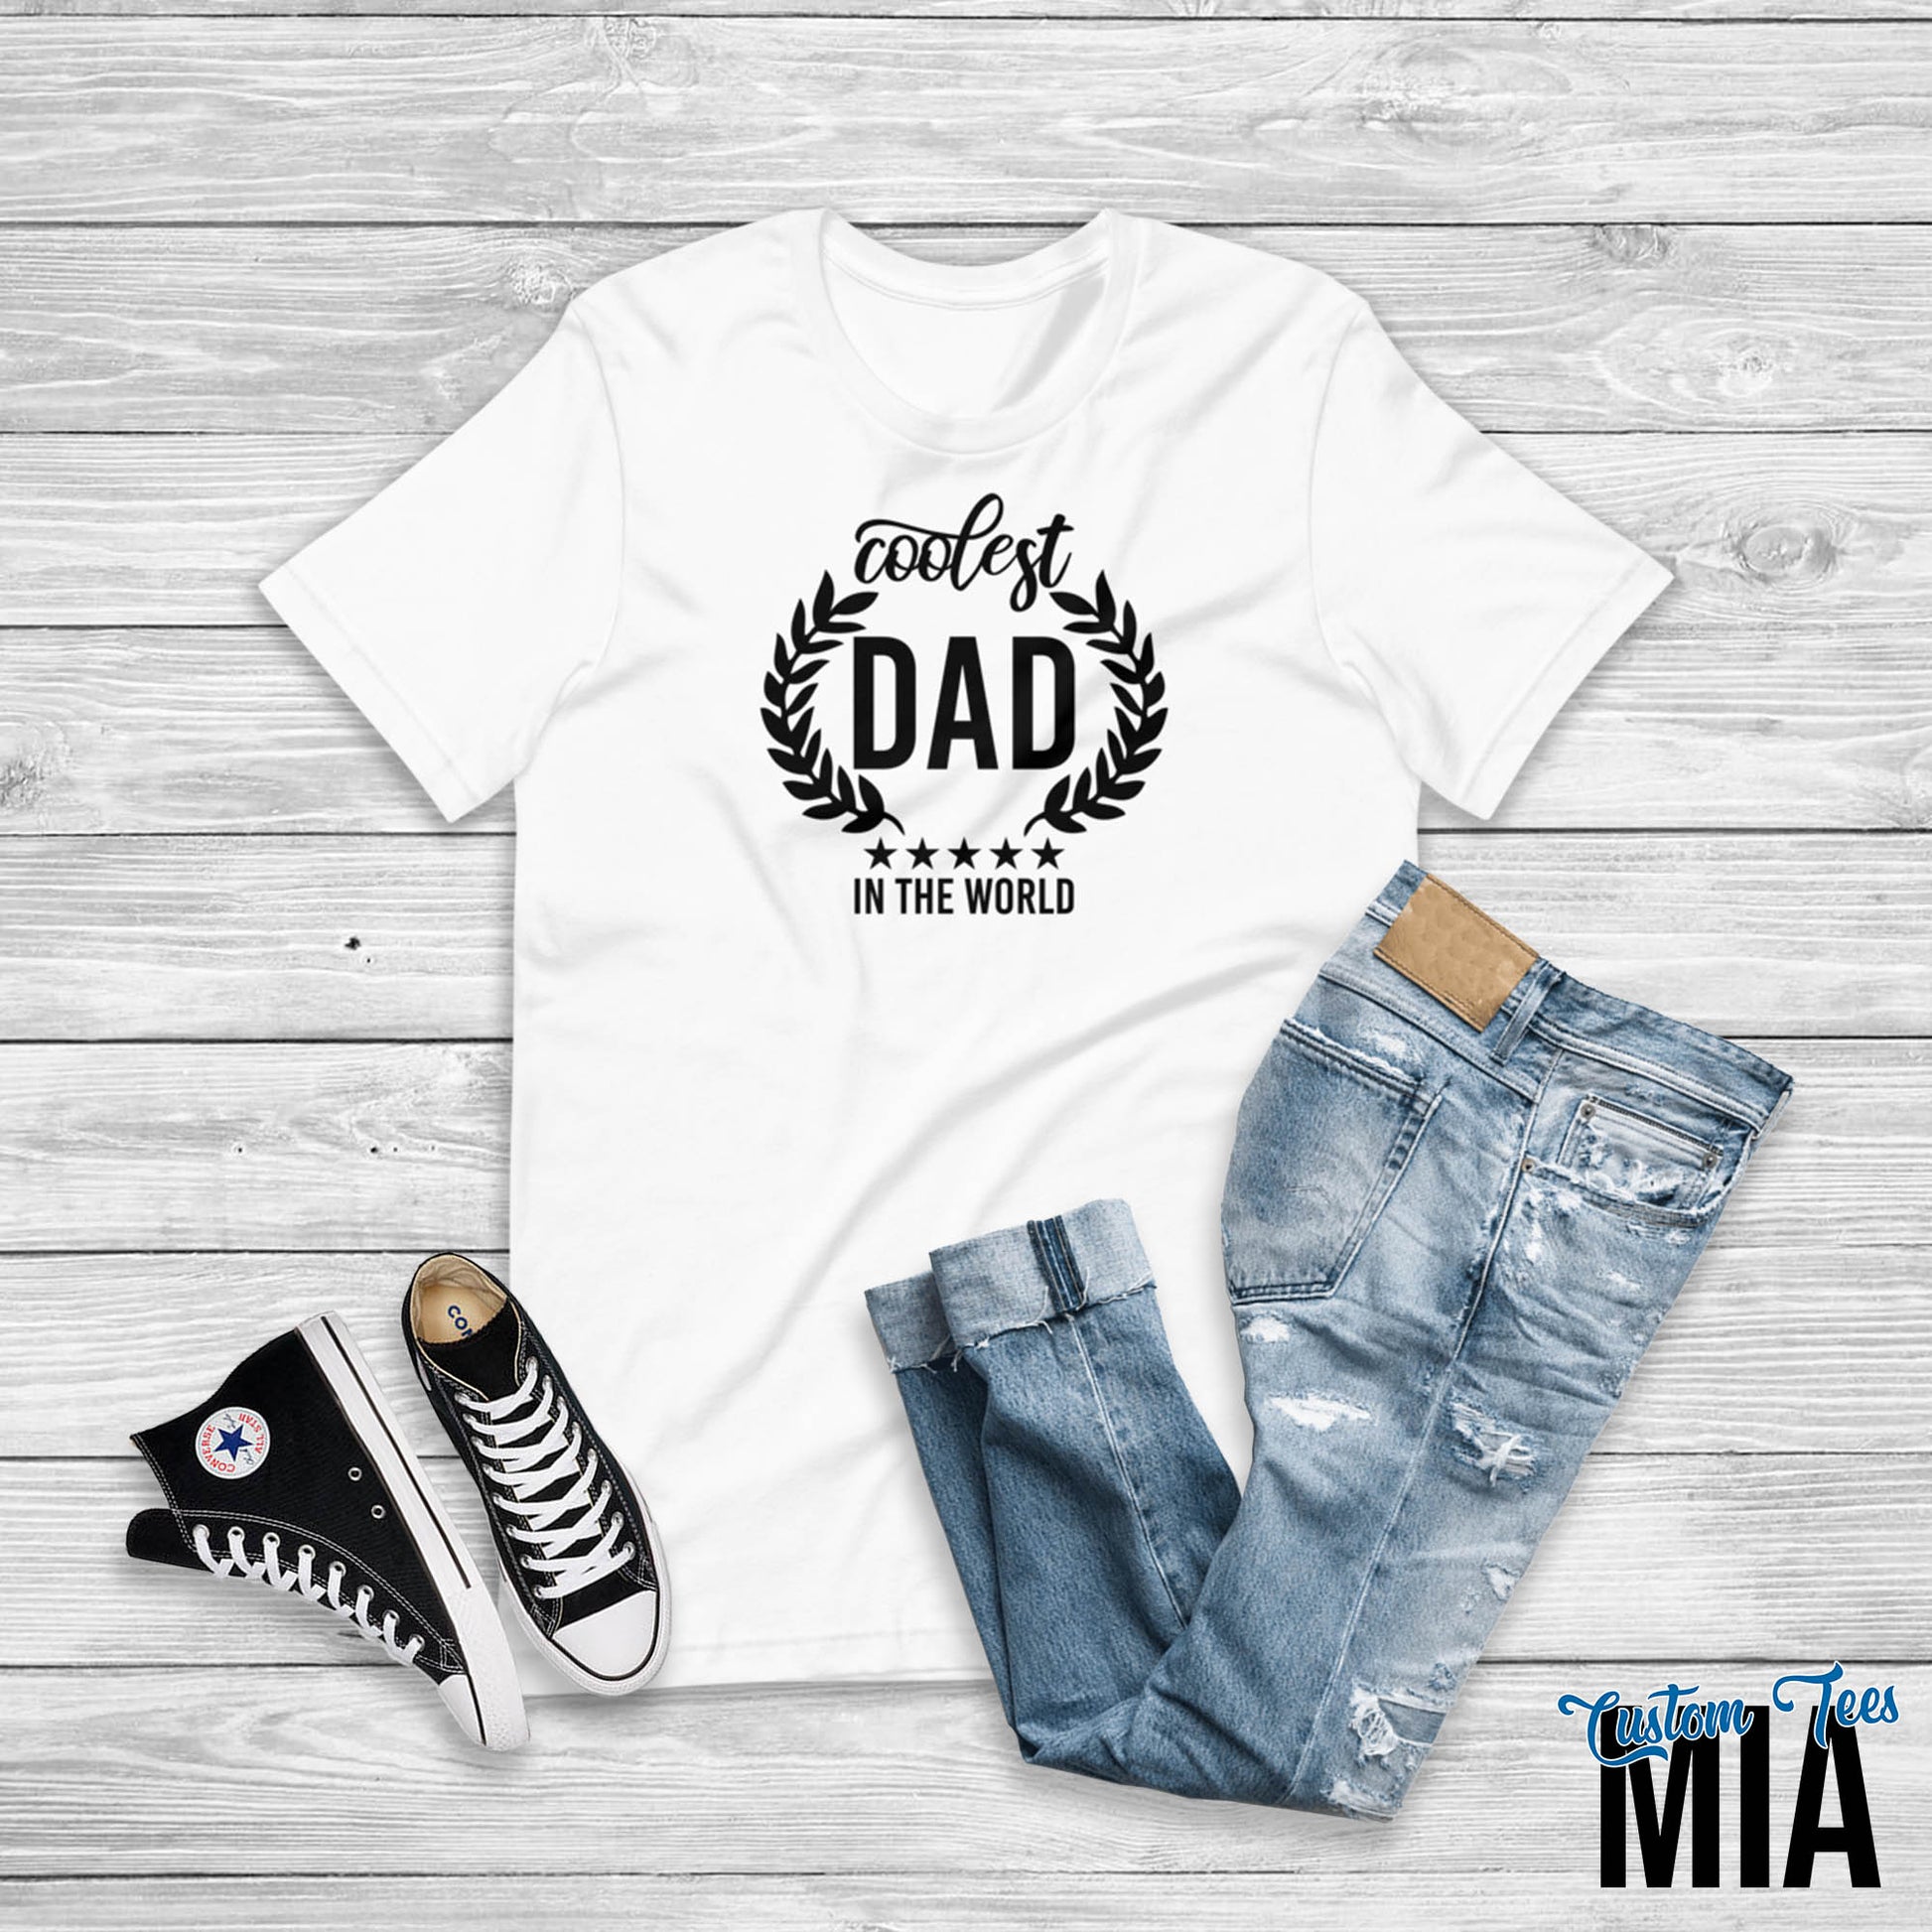 Coolest Dad In The World Shirt - Custom Tees MIA